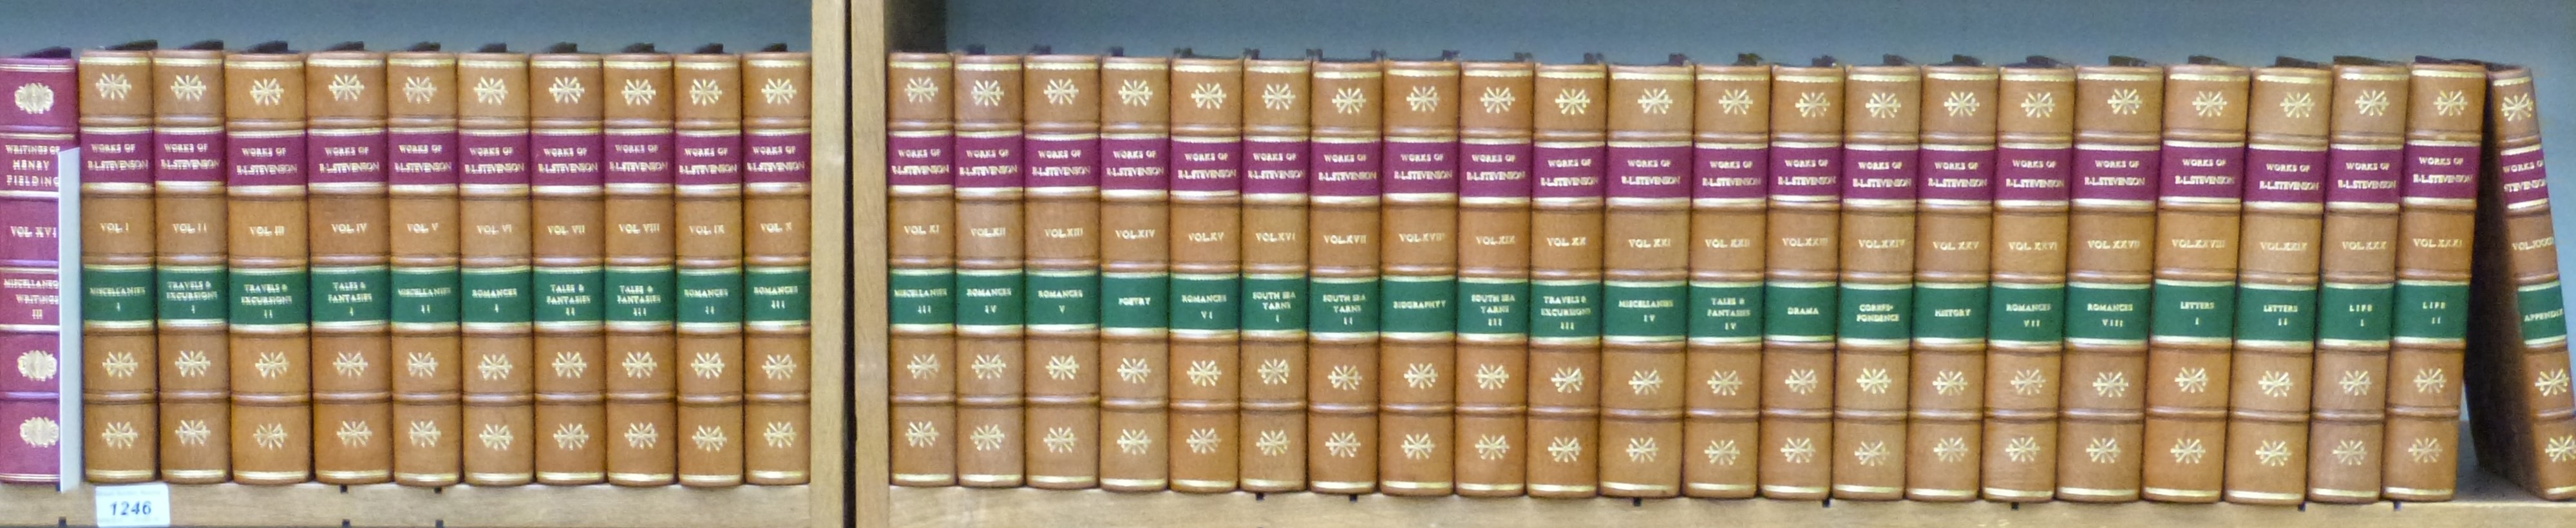 [BINDINGS] ROBERT LOUIS STEVENSON, Works. Publ. Constable, Edinburgh, 1894. 32 Vols. The Edinburgh Edition.Limited Edition Numbered Set This Being Number 454. Sold For £750